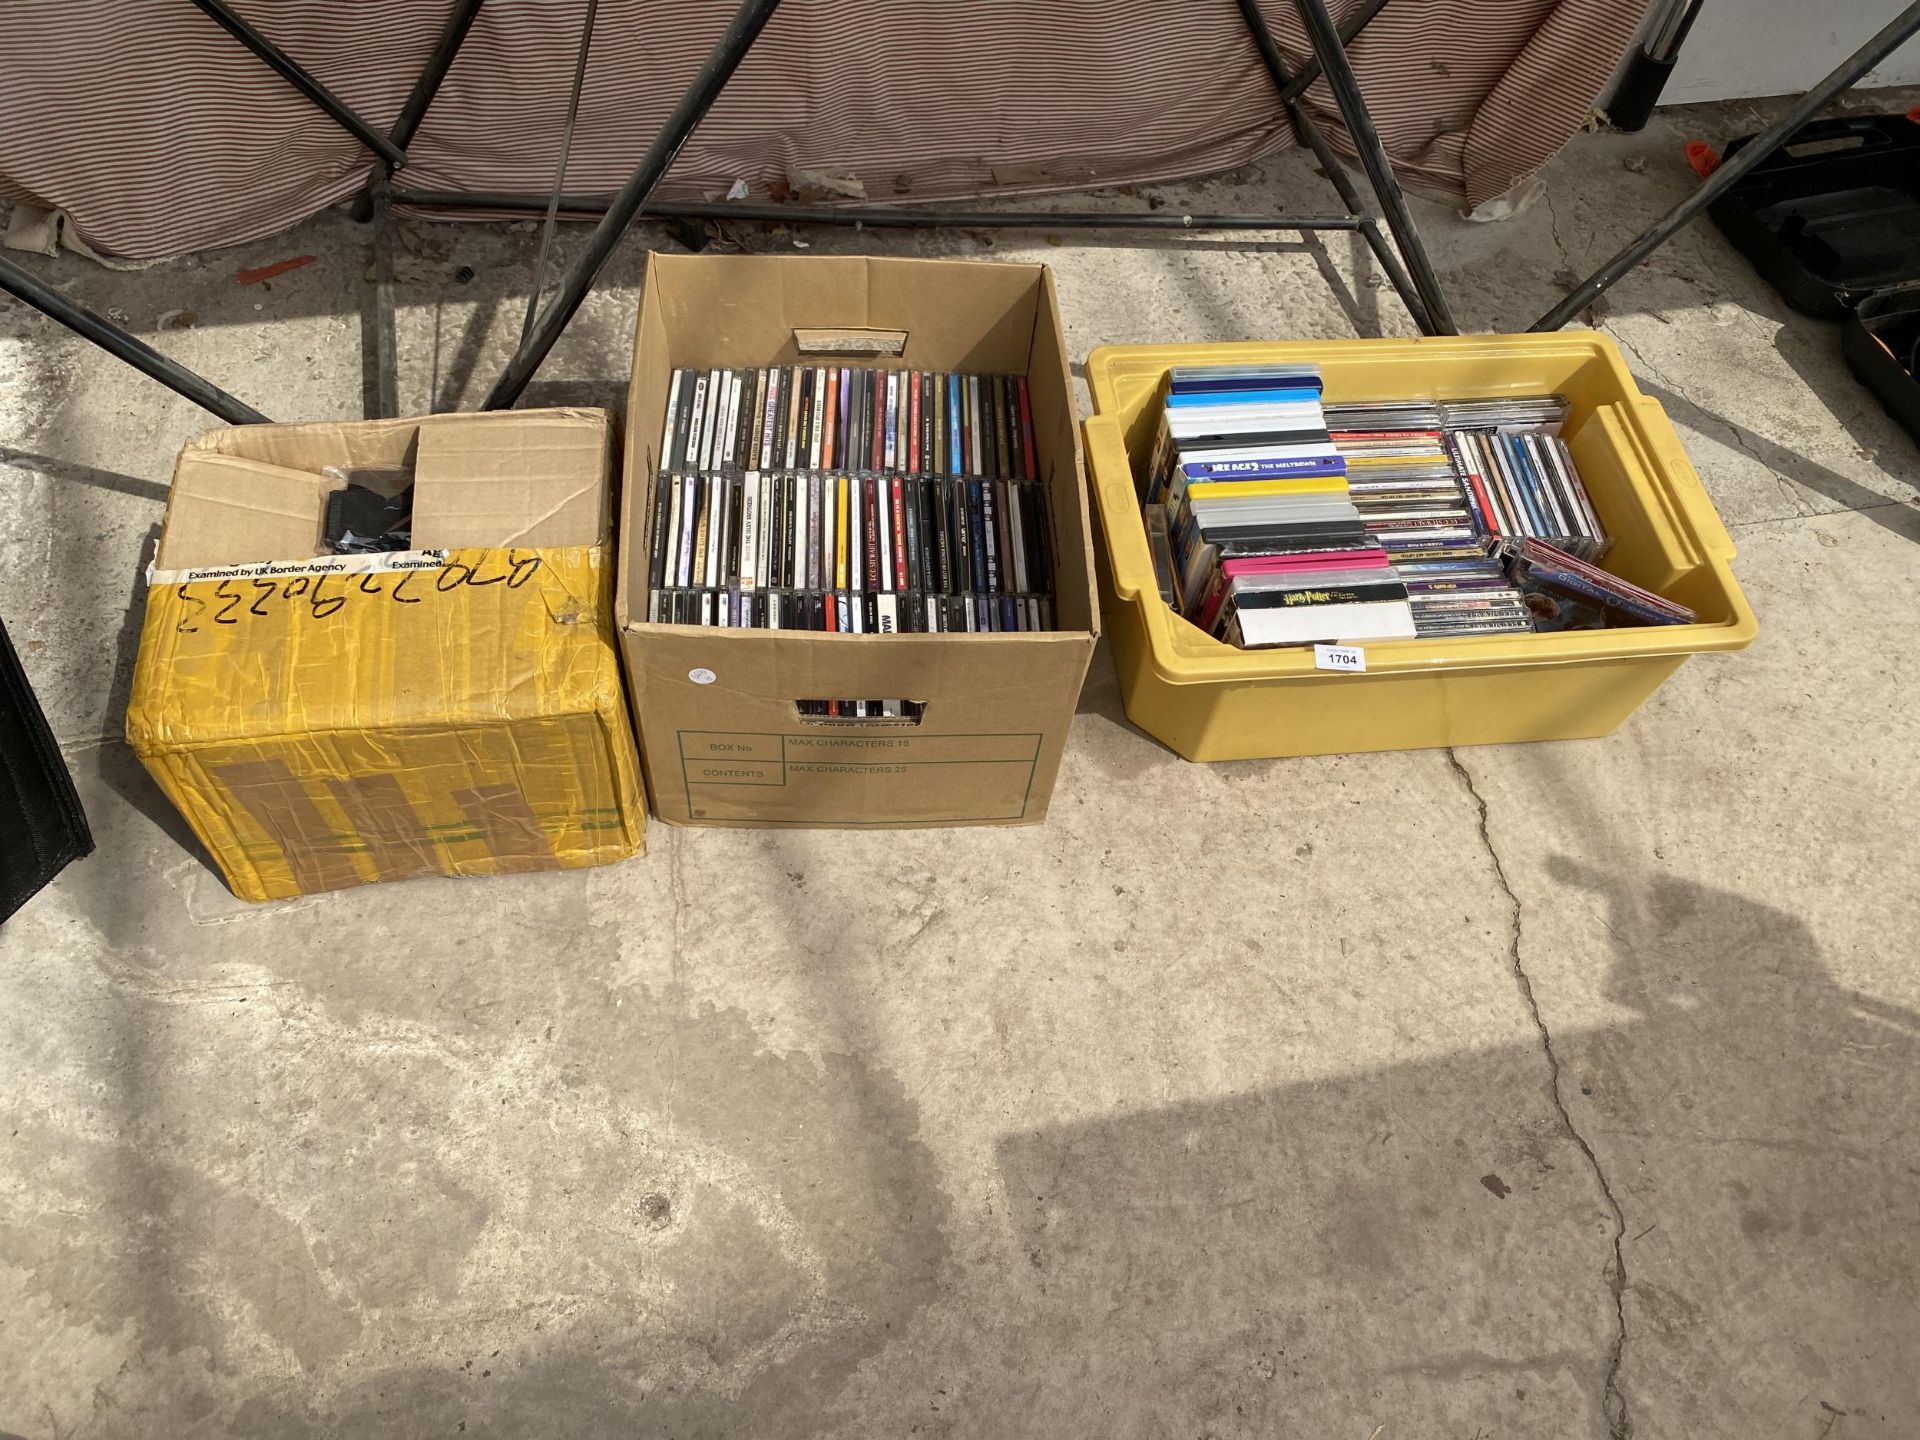 A LARGE QUANTITY OF CDS AND DVDS